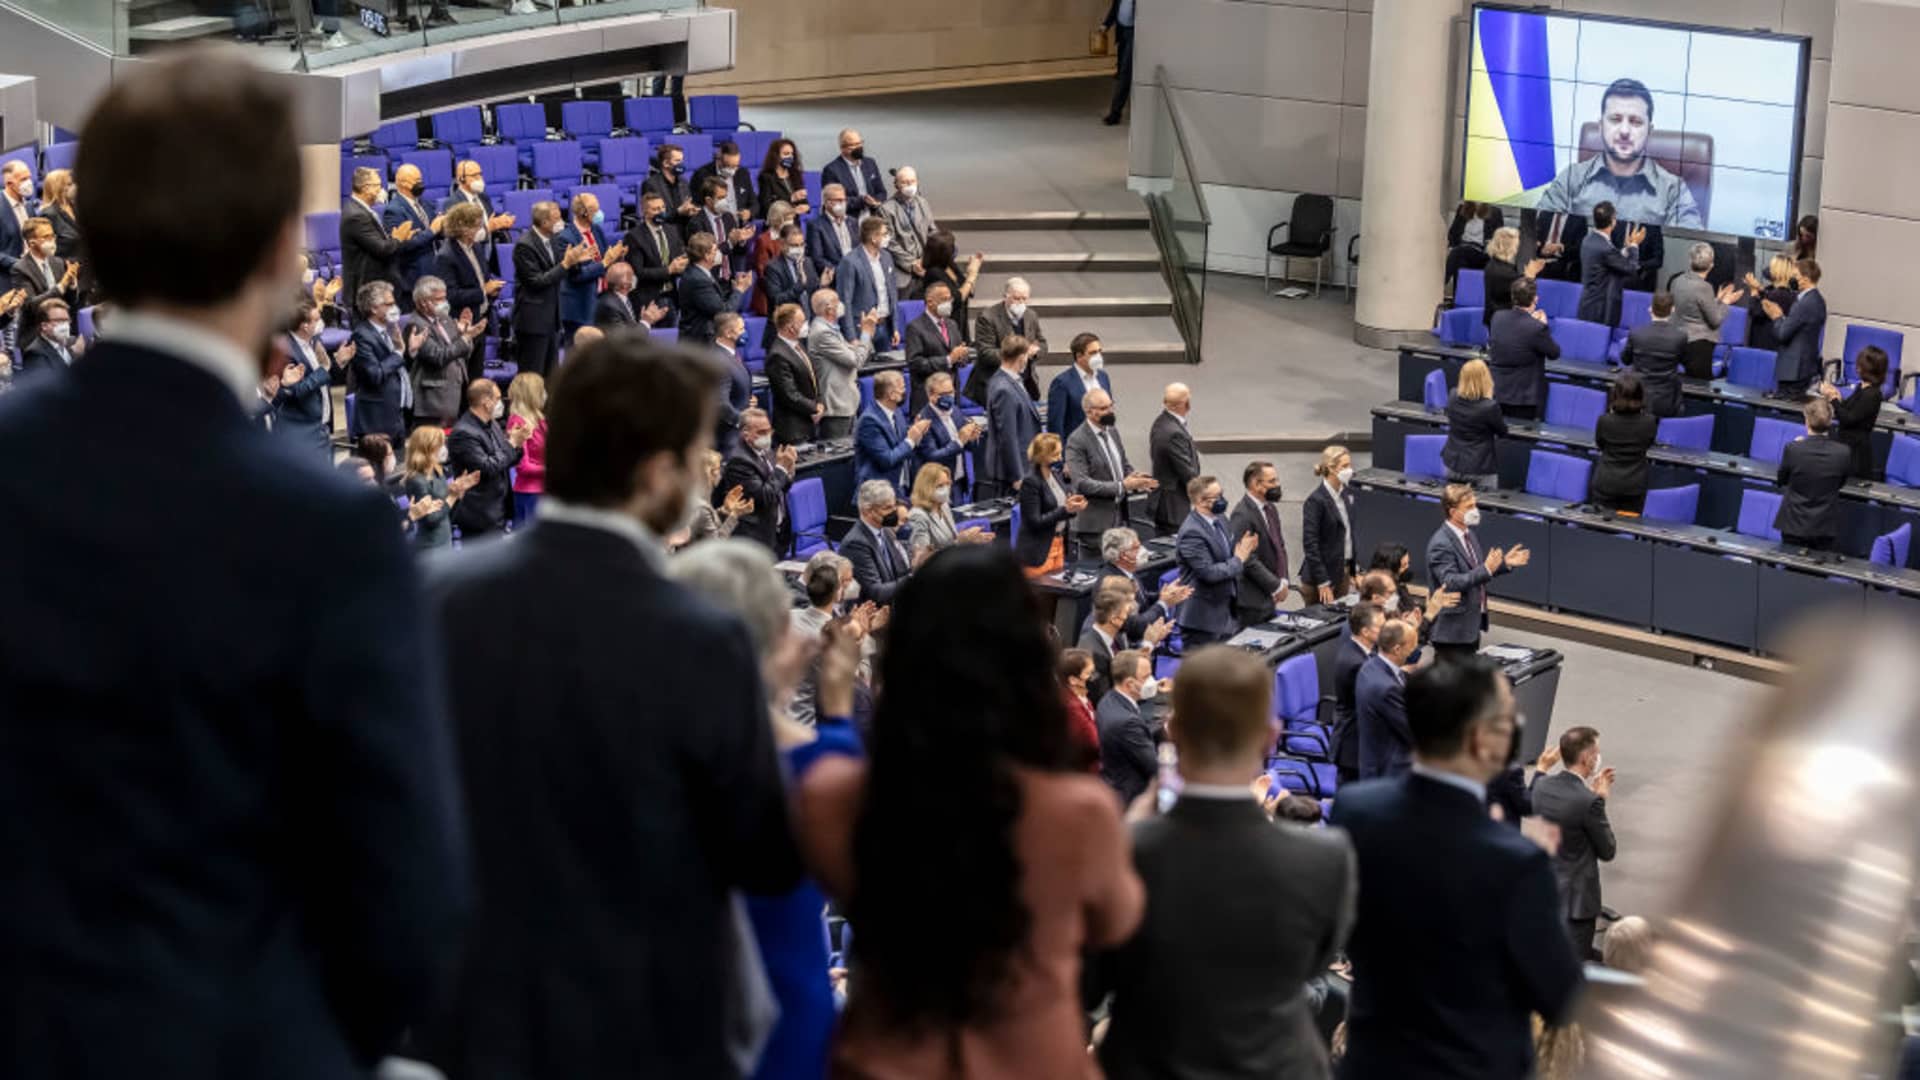 Ukrainian President Volodymyr Zelenskyy receives standing ovations before he addresses the German Bundestag via live video from Kyiv on March 17, 2022.